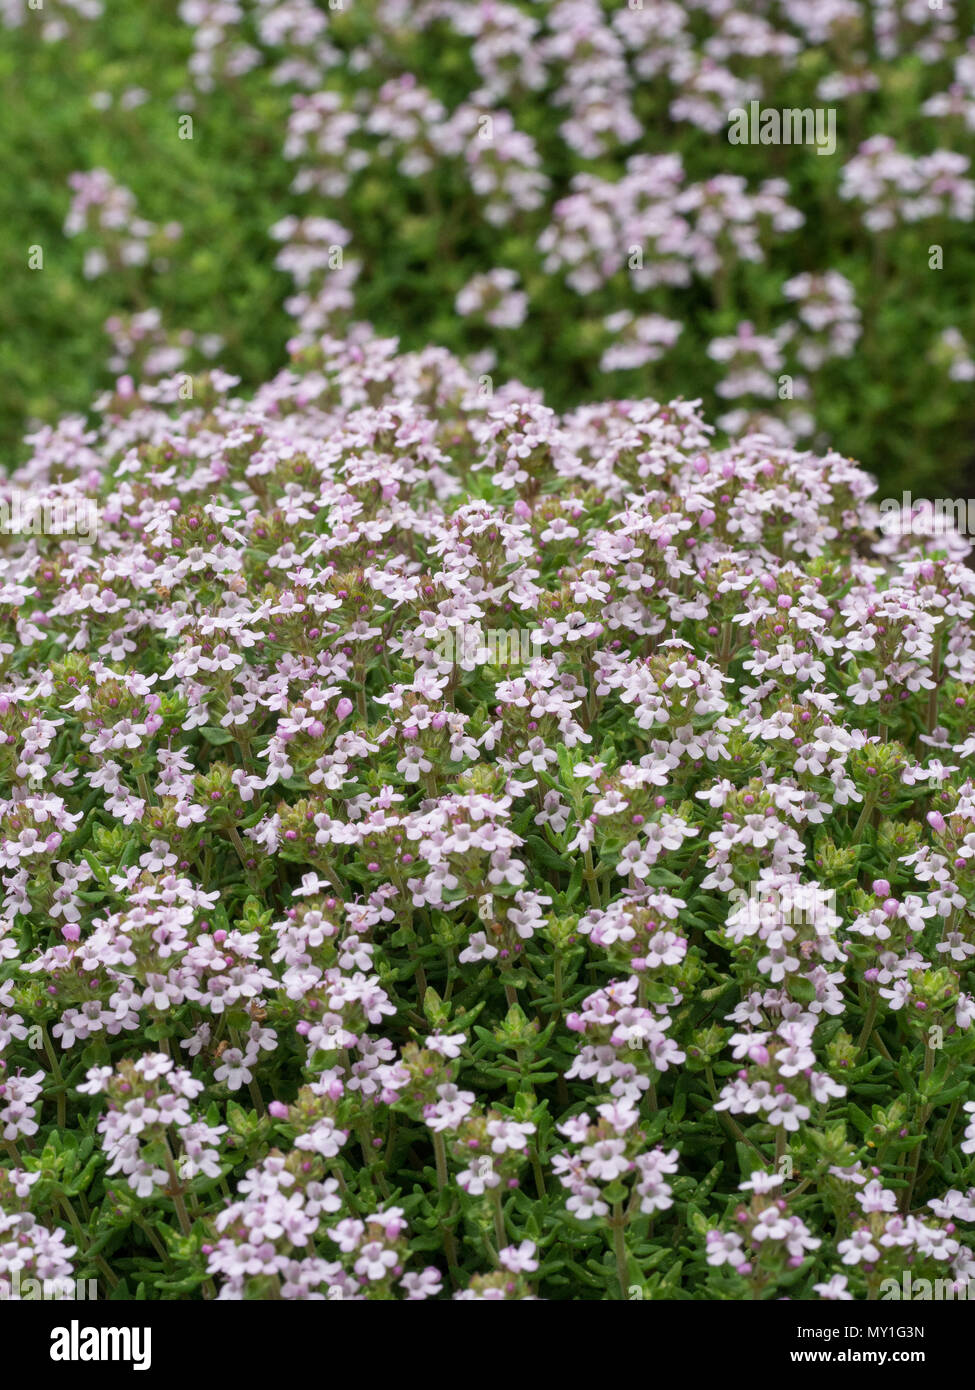 A portrait view of a flowering hedge of thyme Stock Photo